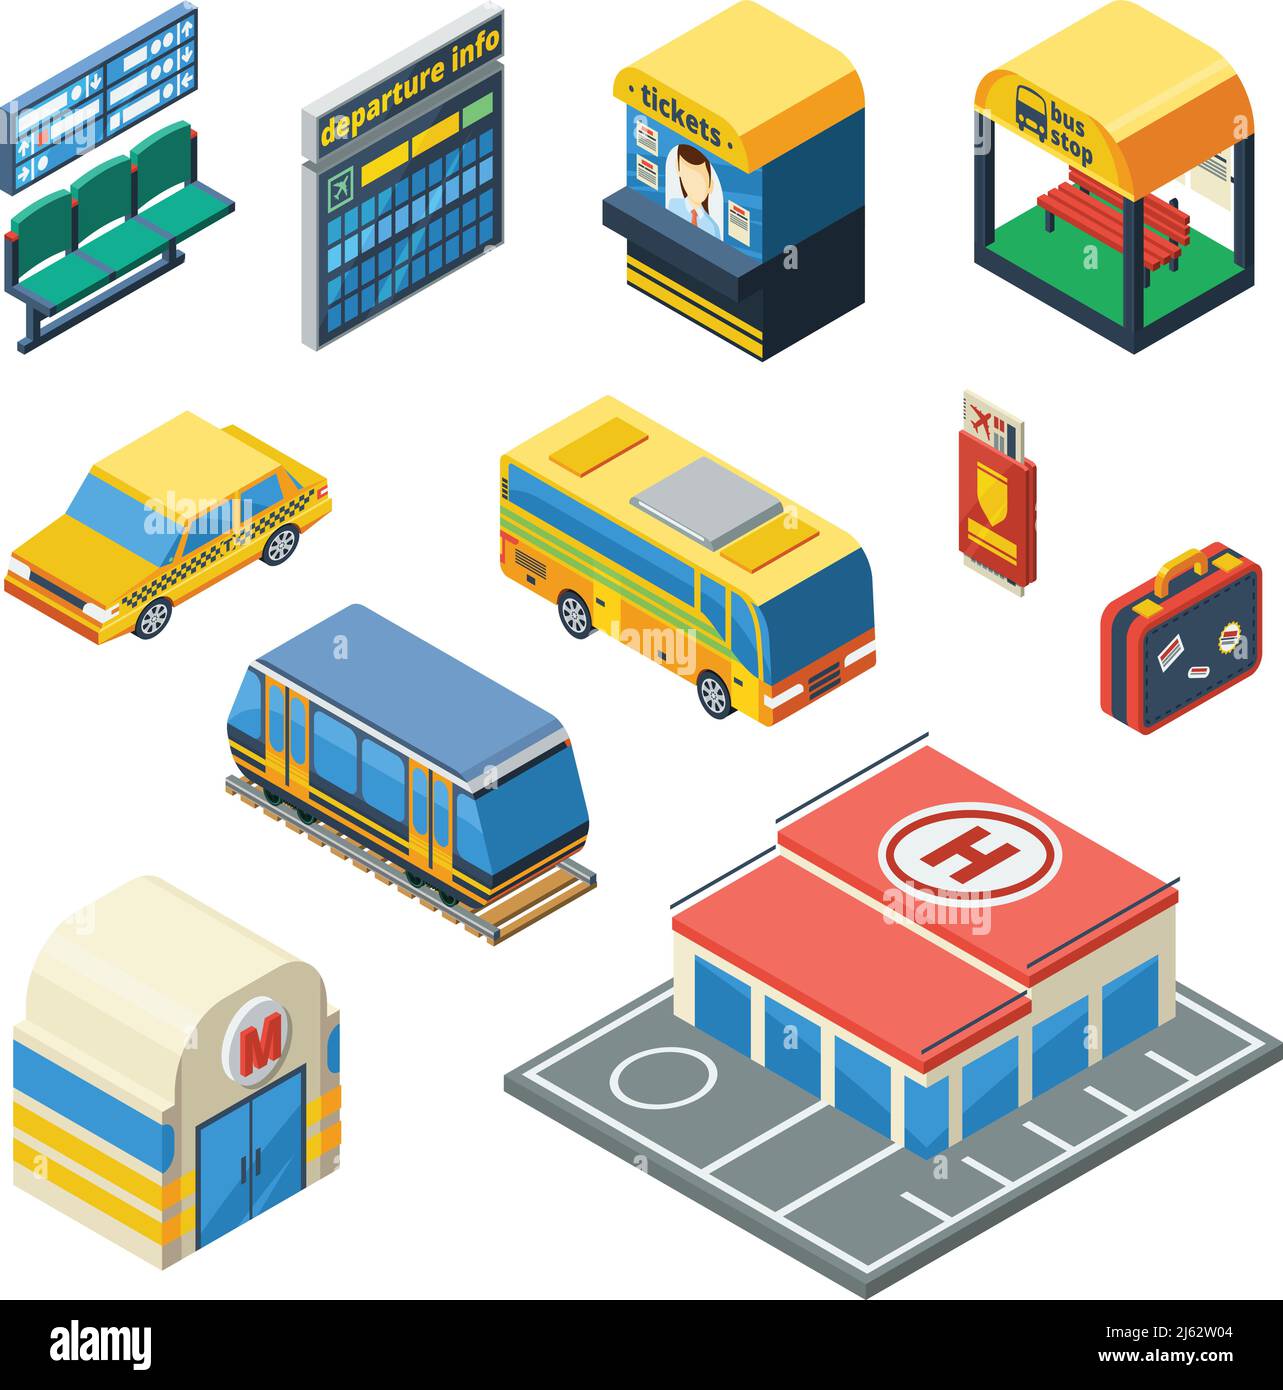 Passenger transportation isometric icons set of taxi bus tram subway station waiting hall with departure scoreboard isolated vector illustration Stock Vector